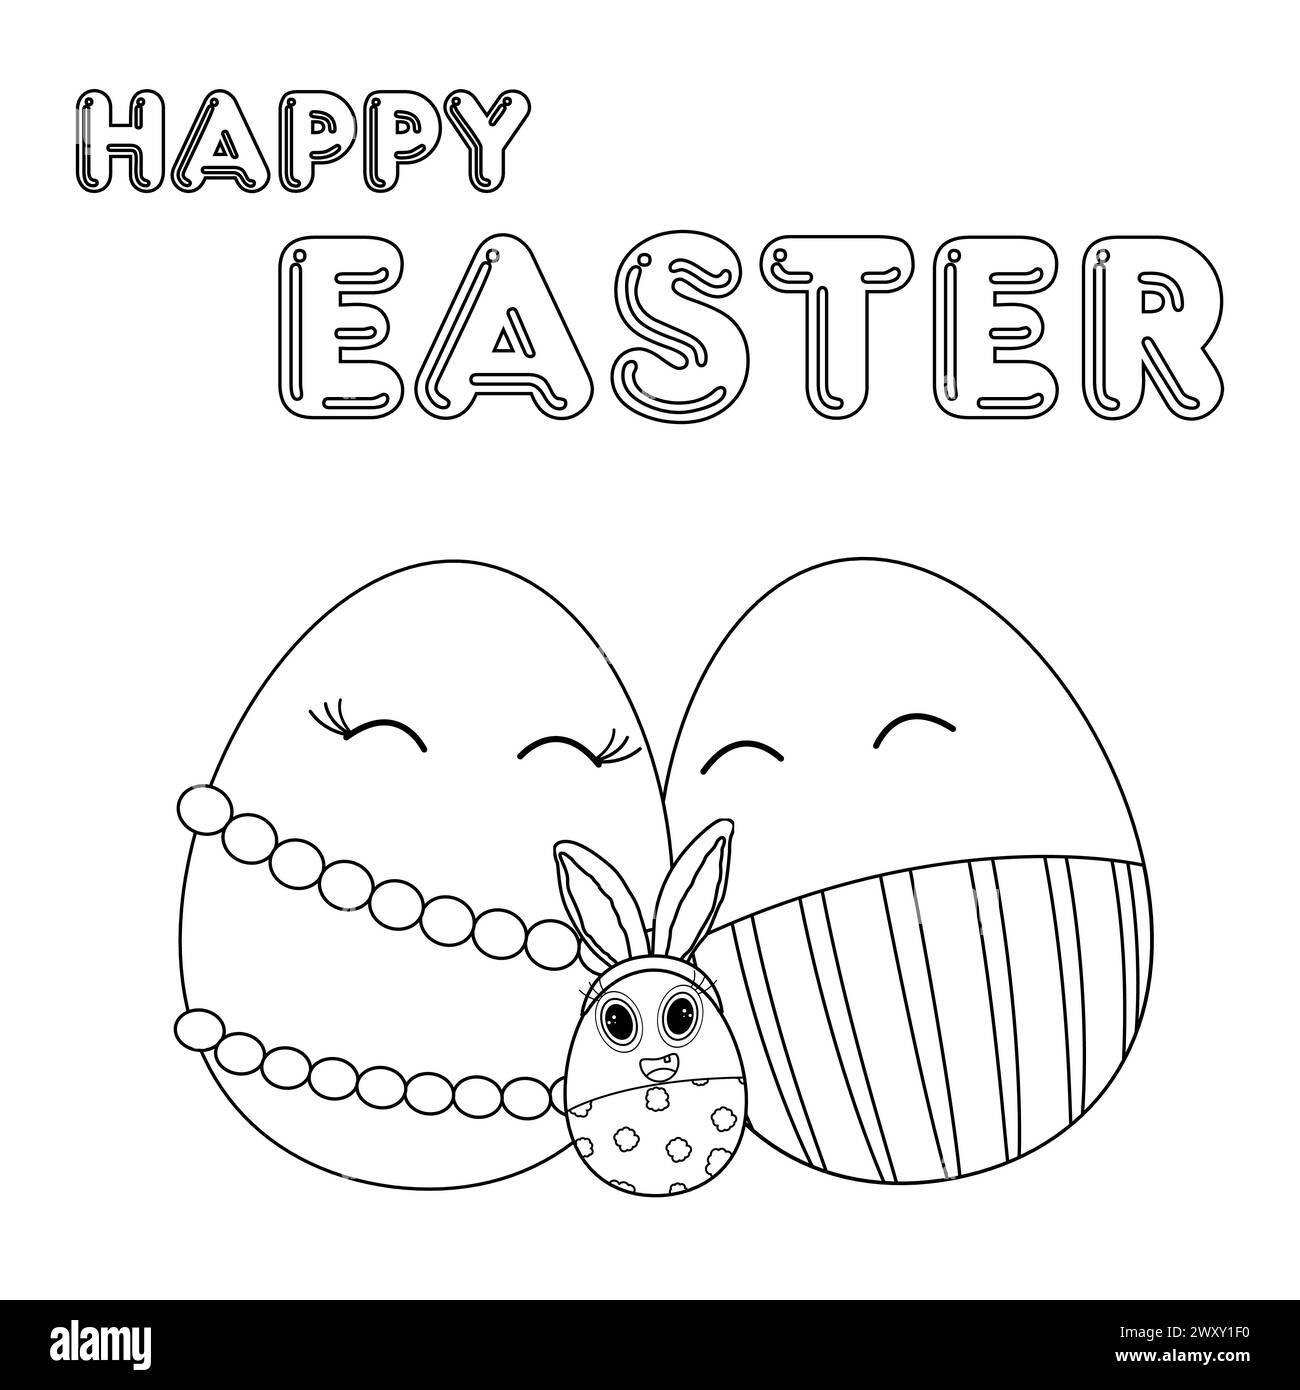 Happy anthropomorphic easter egg family hugging. Dad, mom, baby boy with bunny ears. Picture with text - Happy Easter. Vector black and white drawing Stock Vector